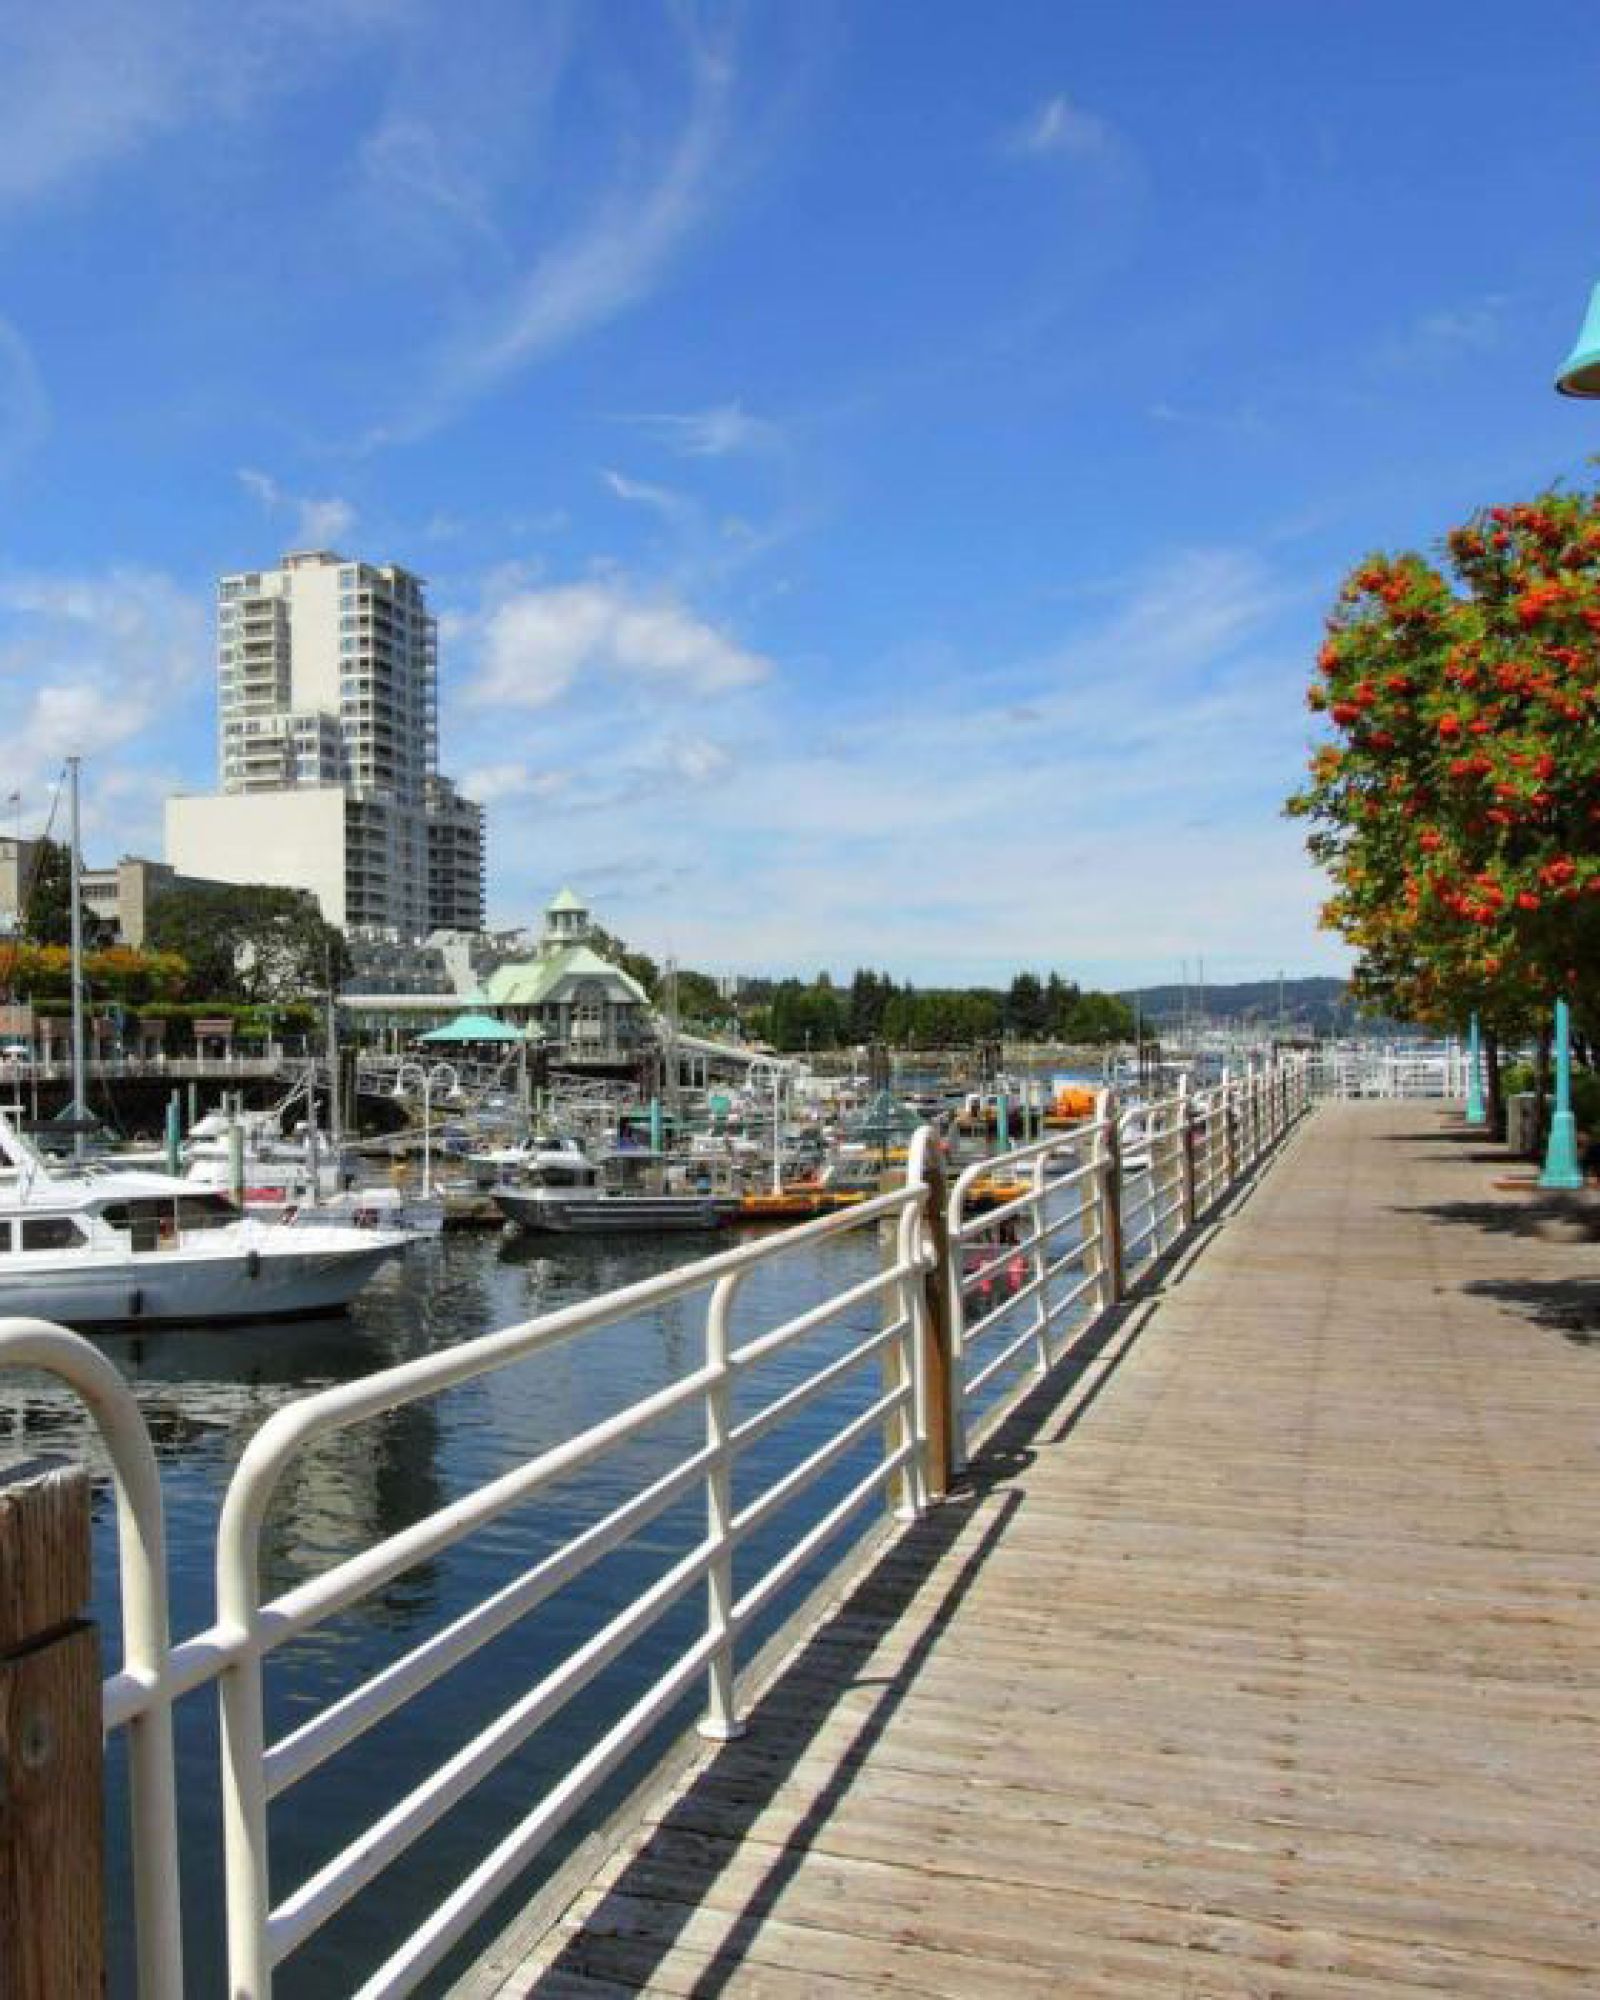 Downtown Nanaimo harbour, view from the boardwalk